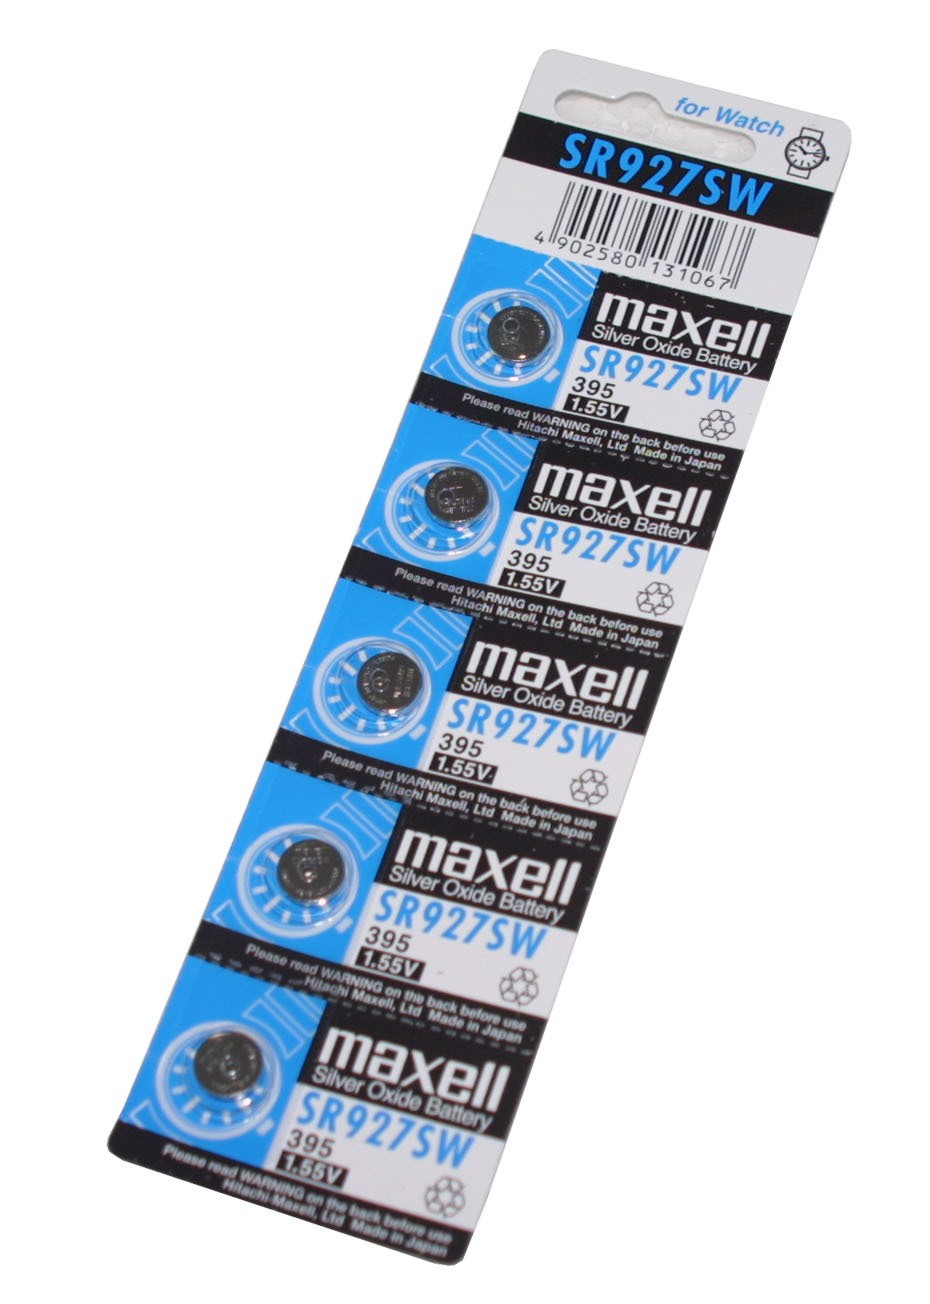 Maxell-SR927SW-395-Silver-Oxide-Watch-Battery-x-100-pcs-Made-in-Japan-FREE-Registered-POST